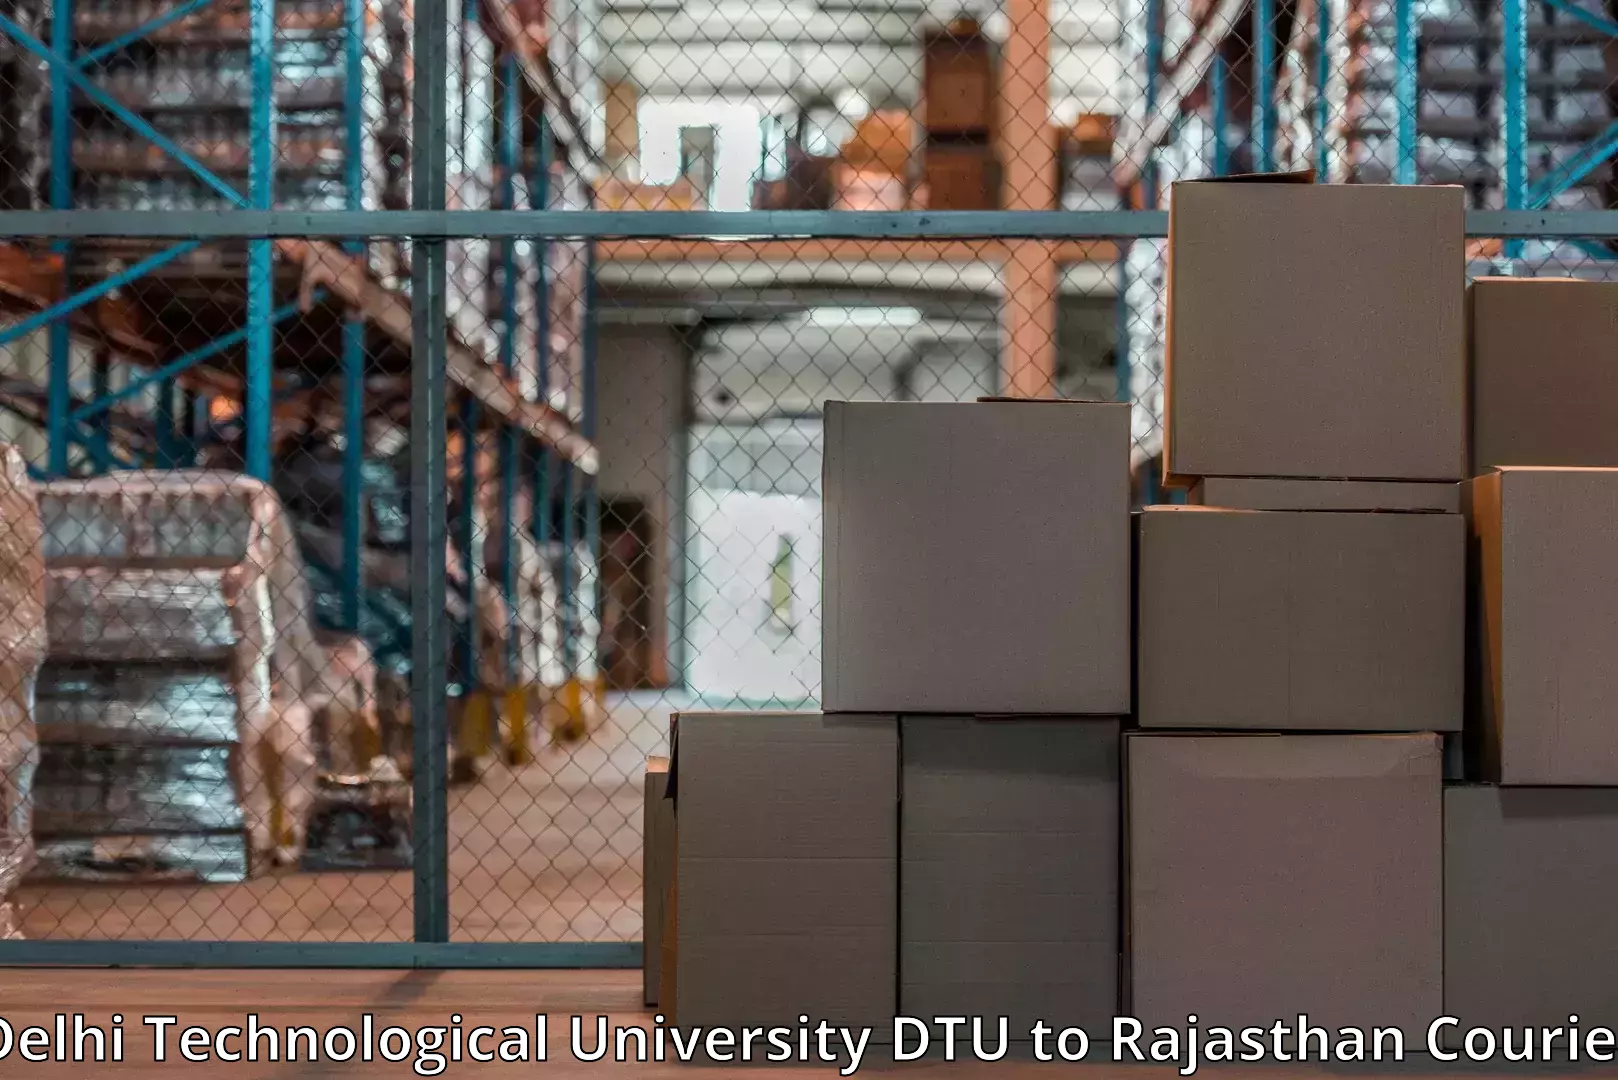 Efficient packing and moving Delhi Technological University DTU to Behror